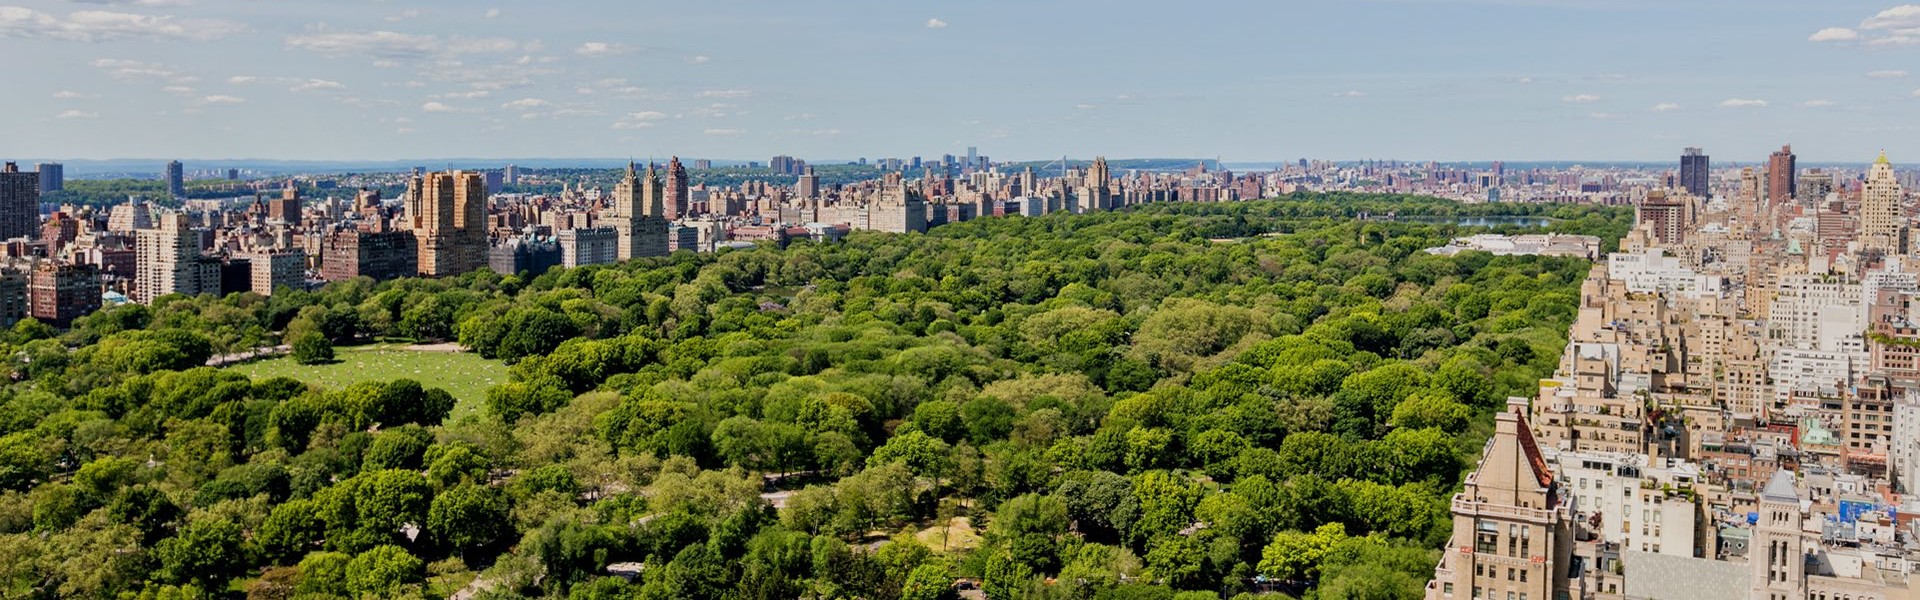 Aerial view of city and central park